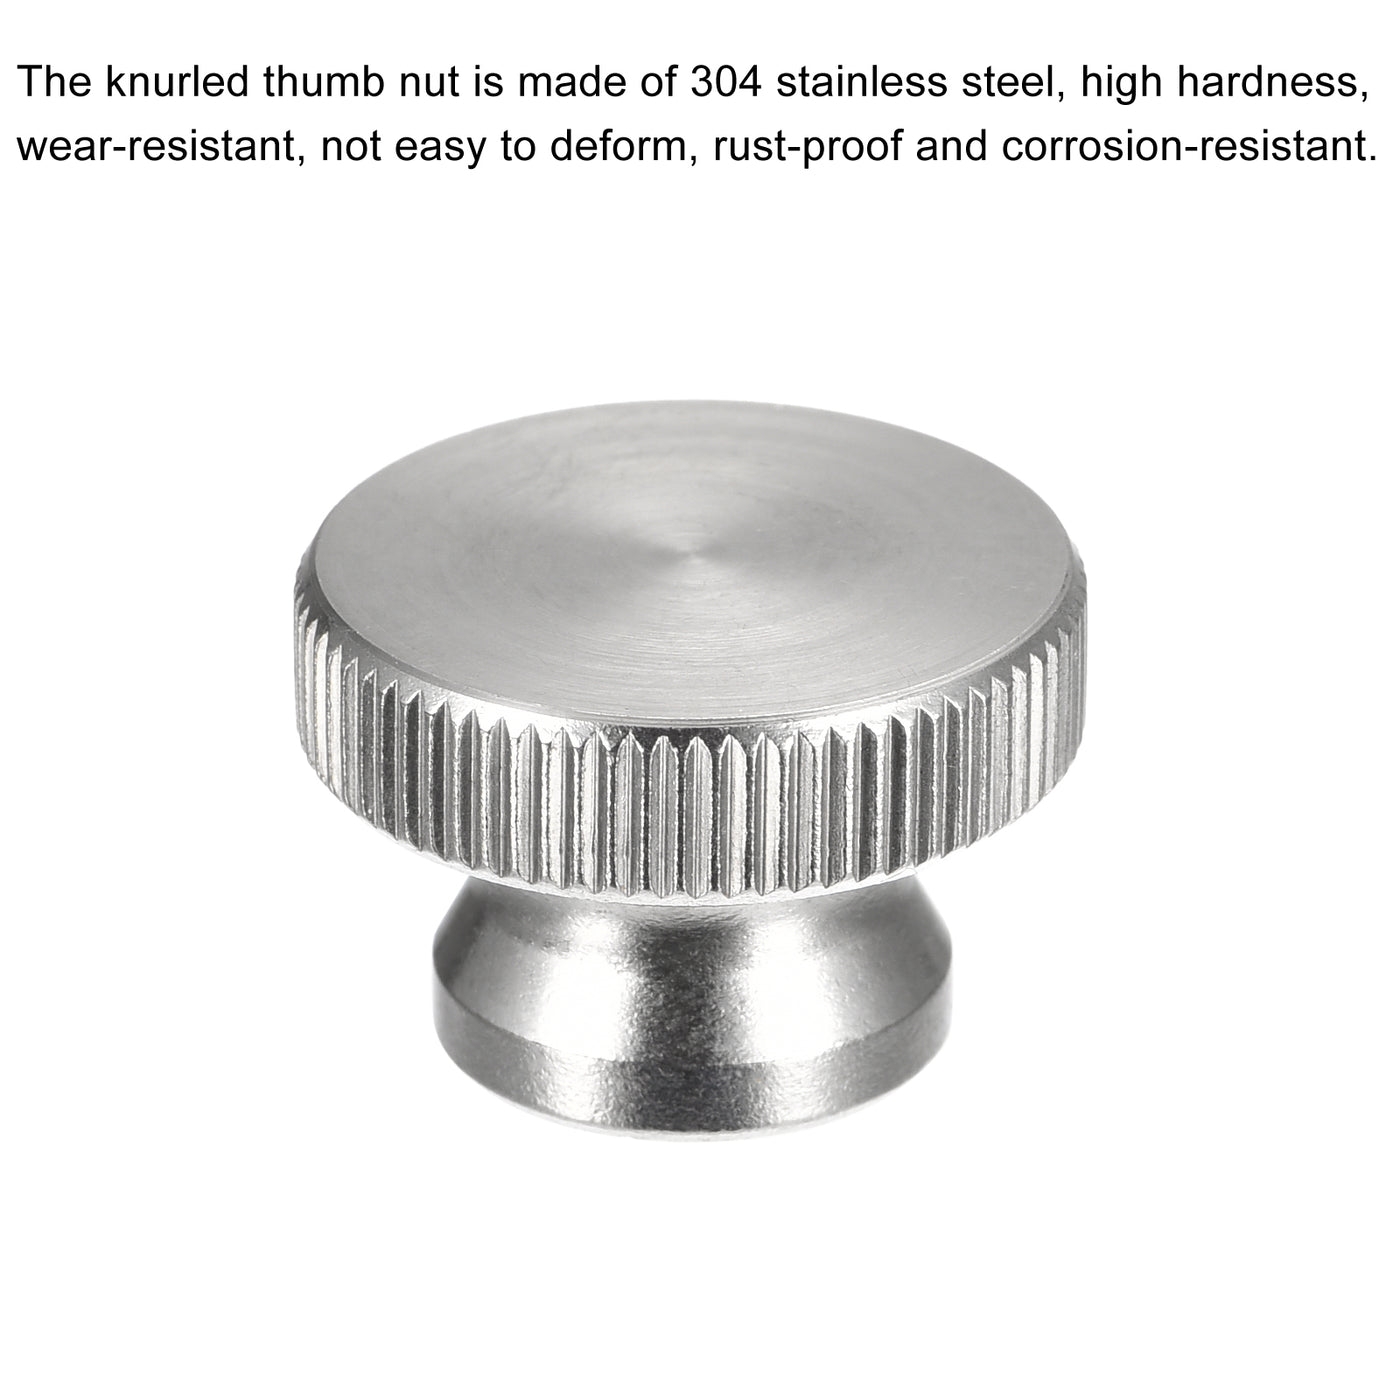 uxcell Uxcell Knurled Thumb Nuts, 4pcs M8 x D24mm x H16mm 304 Stainless Steel Blind Hole Nuts